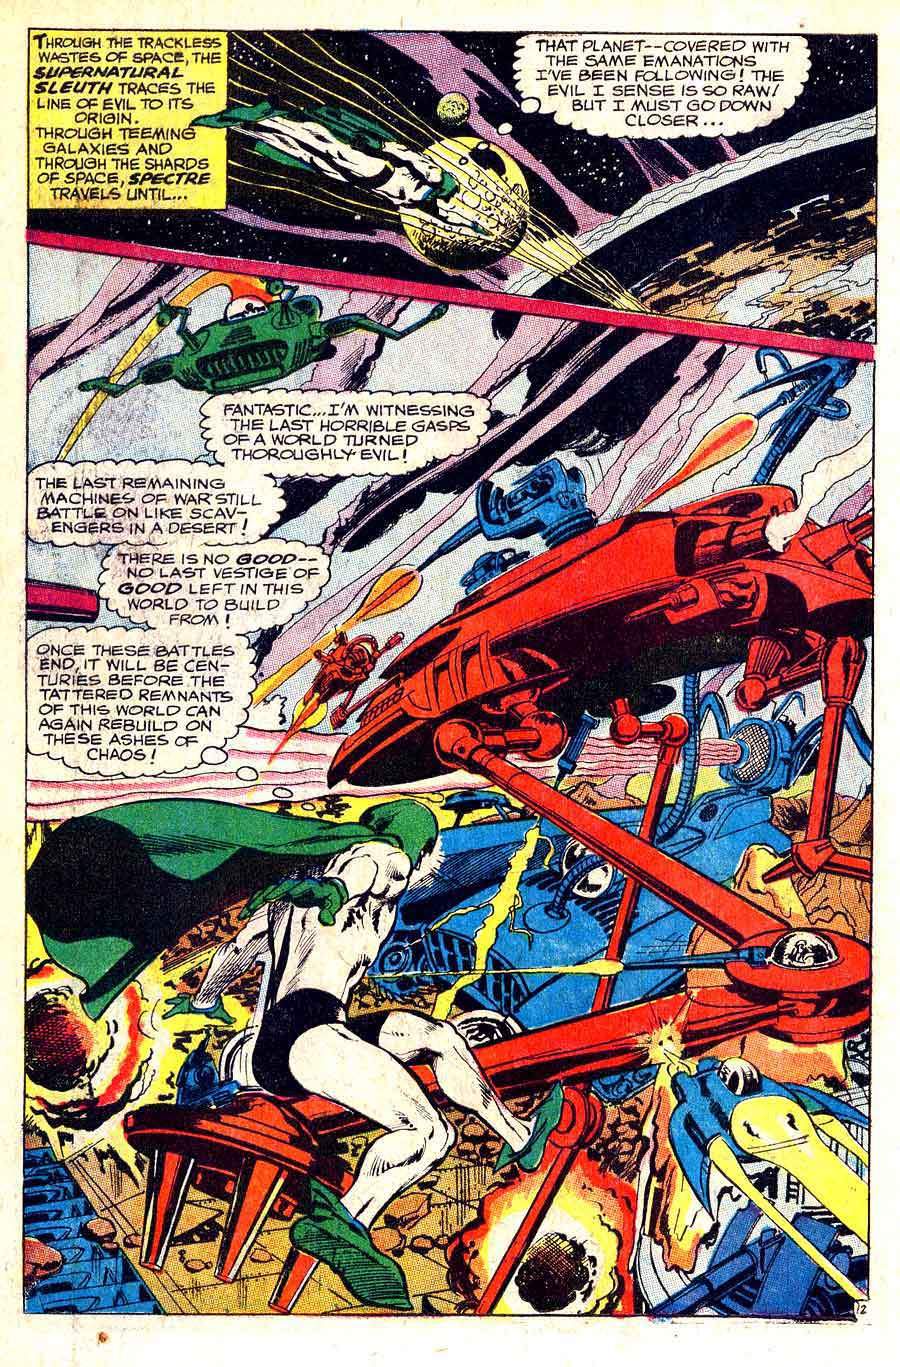 Spectre v1 #4 dc 1960s silver age comic book page art by Neal Adams